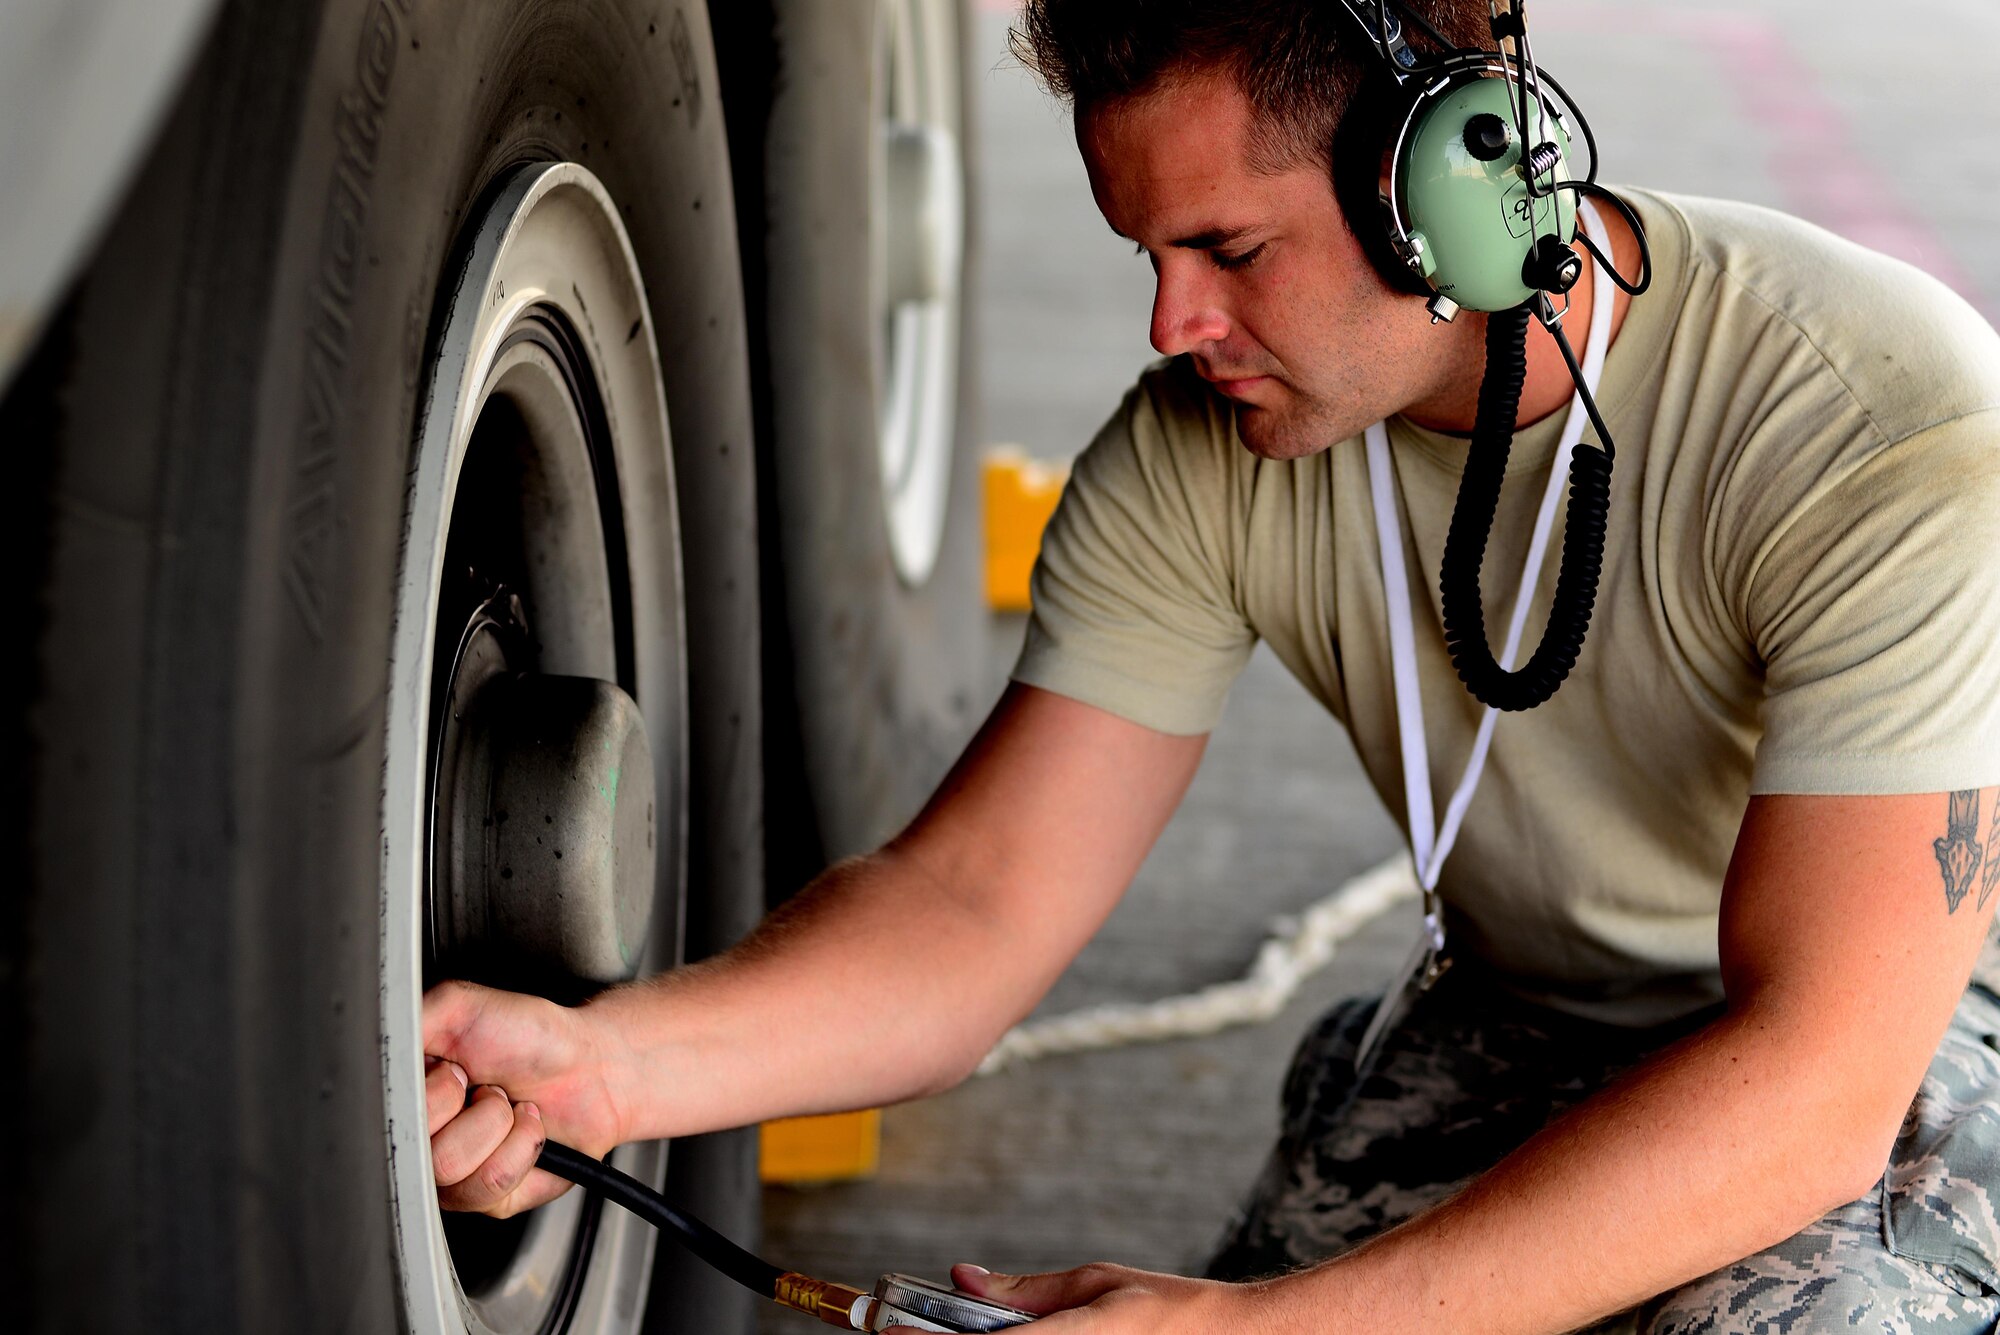 An Airman assigned to the 86th Aircraft Maintenance Squadron, 86th Airlift Wing, Ramstein Air Base, Germany, checks the tire pressure of a C-130J Super Hercules prior to a sortie in support of exercise Juniper Falcon May 14, at Nevatim Air Force Base, Israel. Juniper Falcon 17 represents the combination of several bi-lateral component exercises with Israel Defense Forces that have been executed annually since 2011. These exercises were combined to increase joint training opportunities and capitalize on transportation and cost efficiencies gained by aggregating forces. (U.S. Air Force photo/ Tech. Sgt. Matthew Plew)